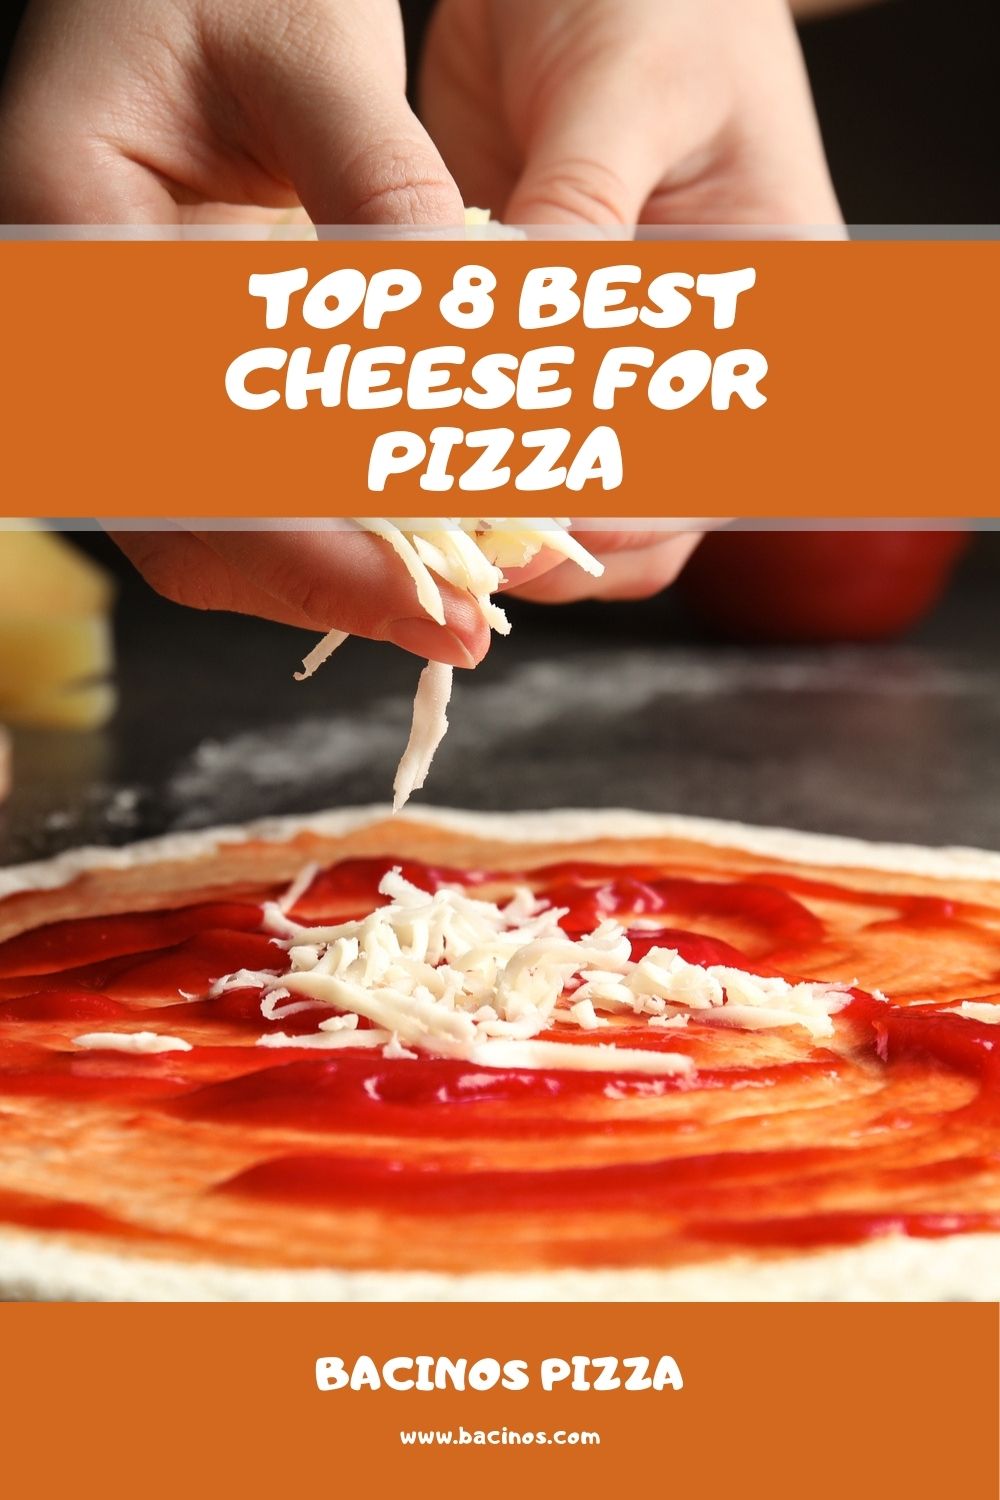 Top 8 Best Cheese for Pizza 2